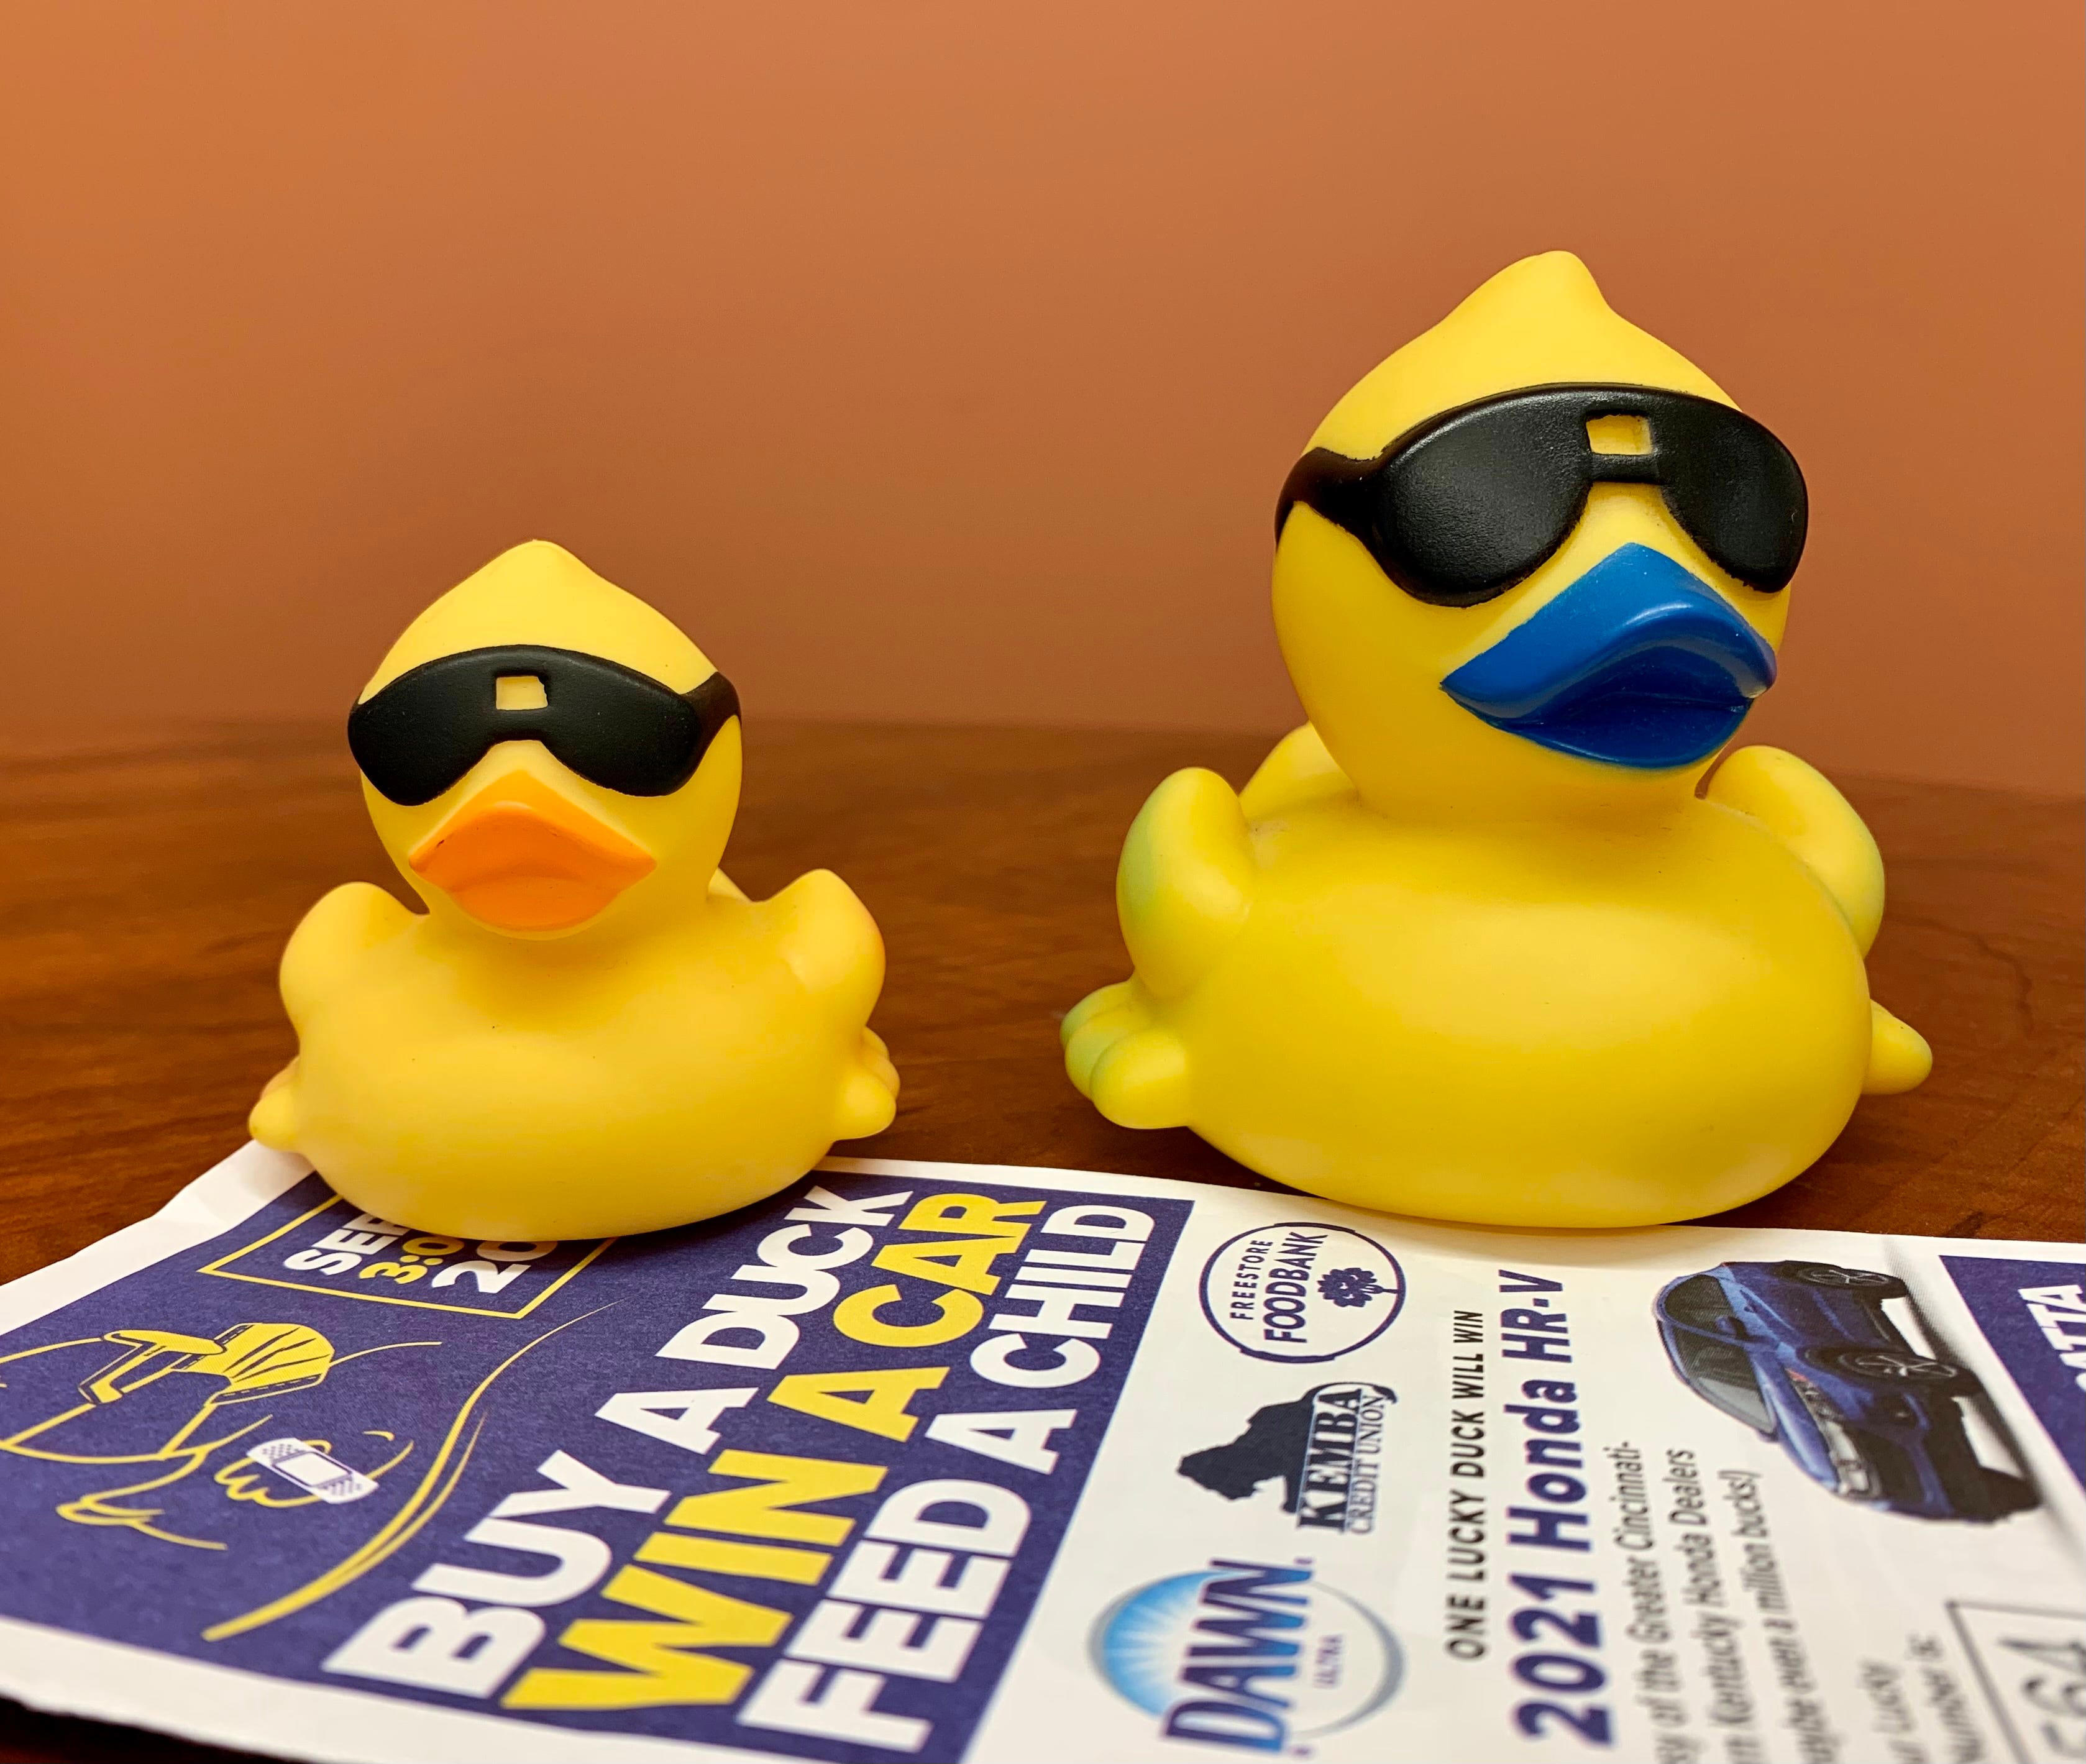 Time is ticking! How to buy ducks for Cincinnati's annual Rubber Duck